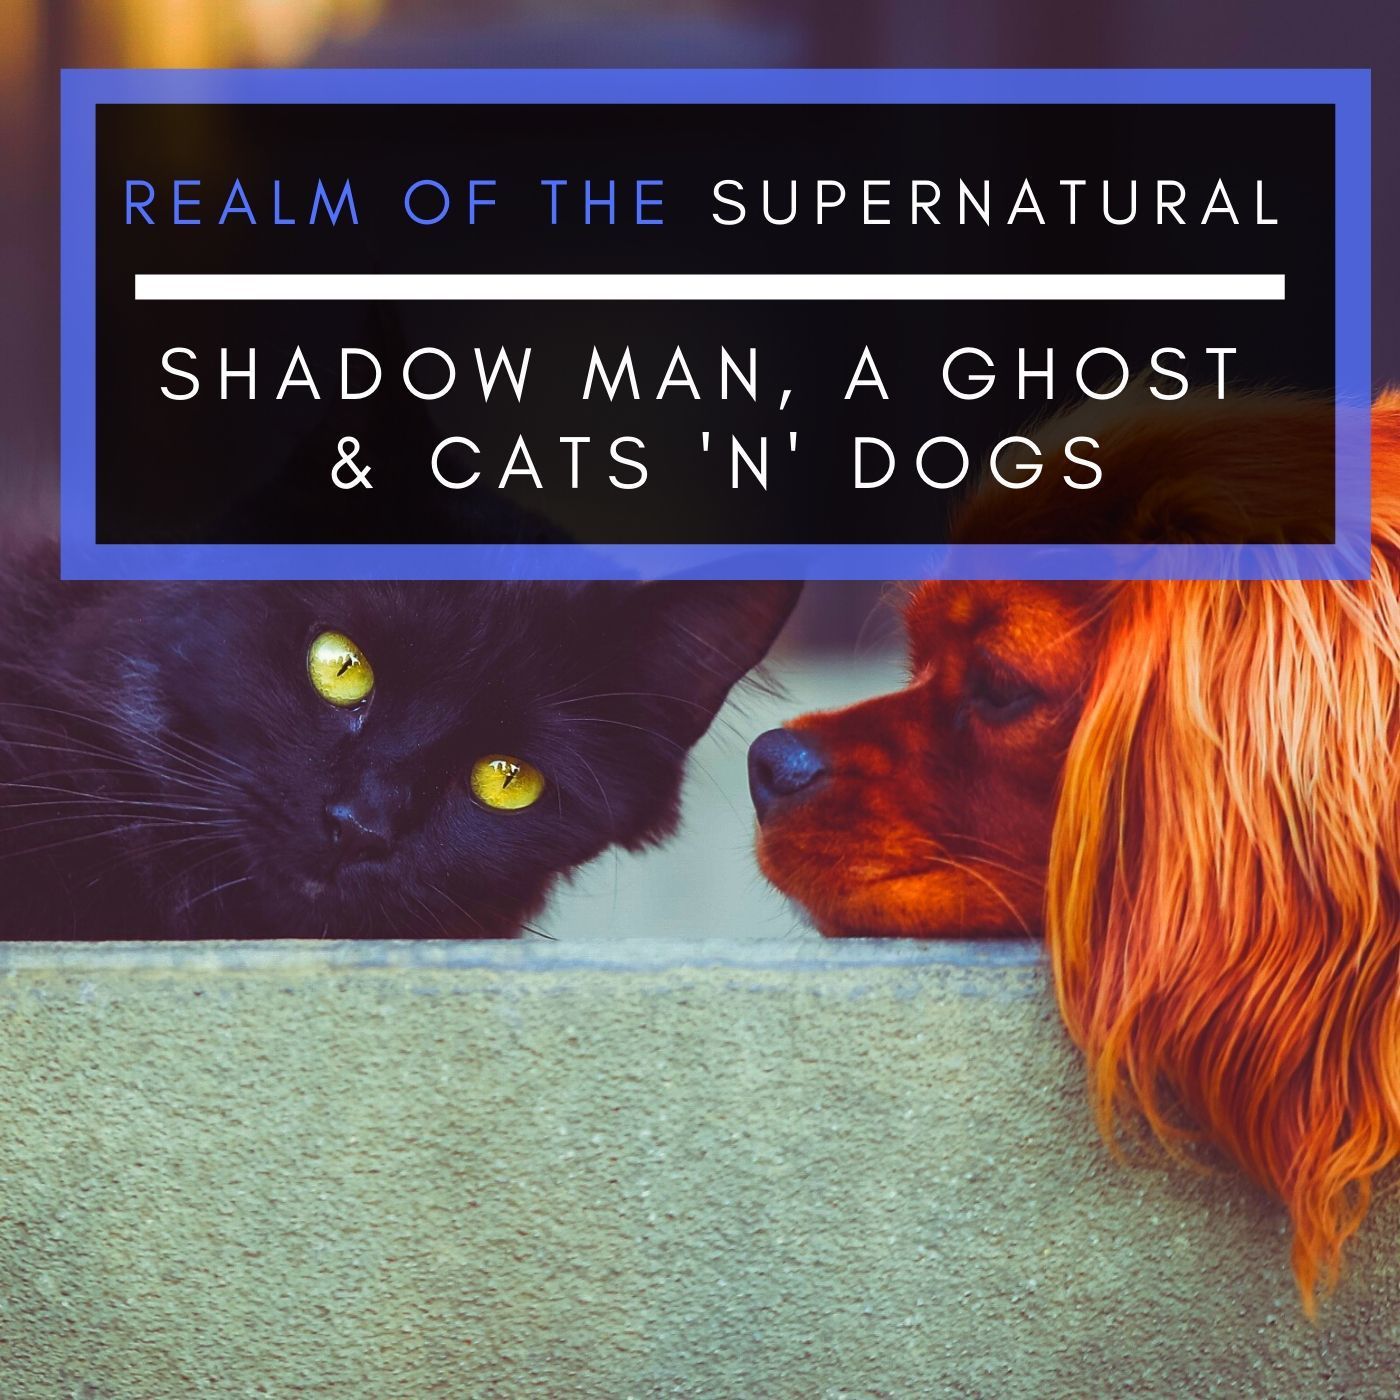 Ep 168 Shadow man, A Ghost & Cats 'n' Dogs